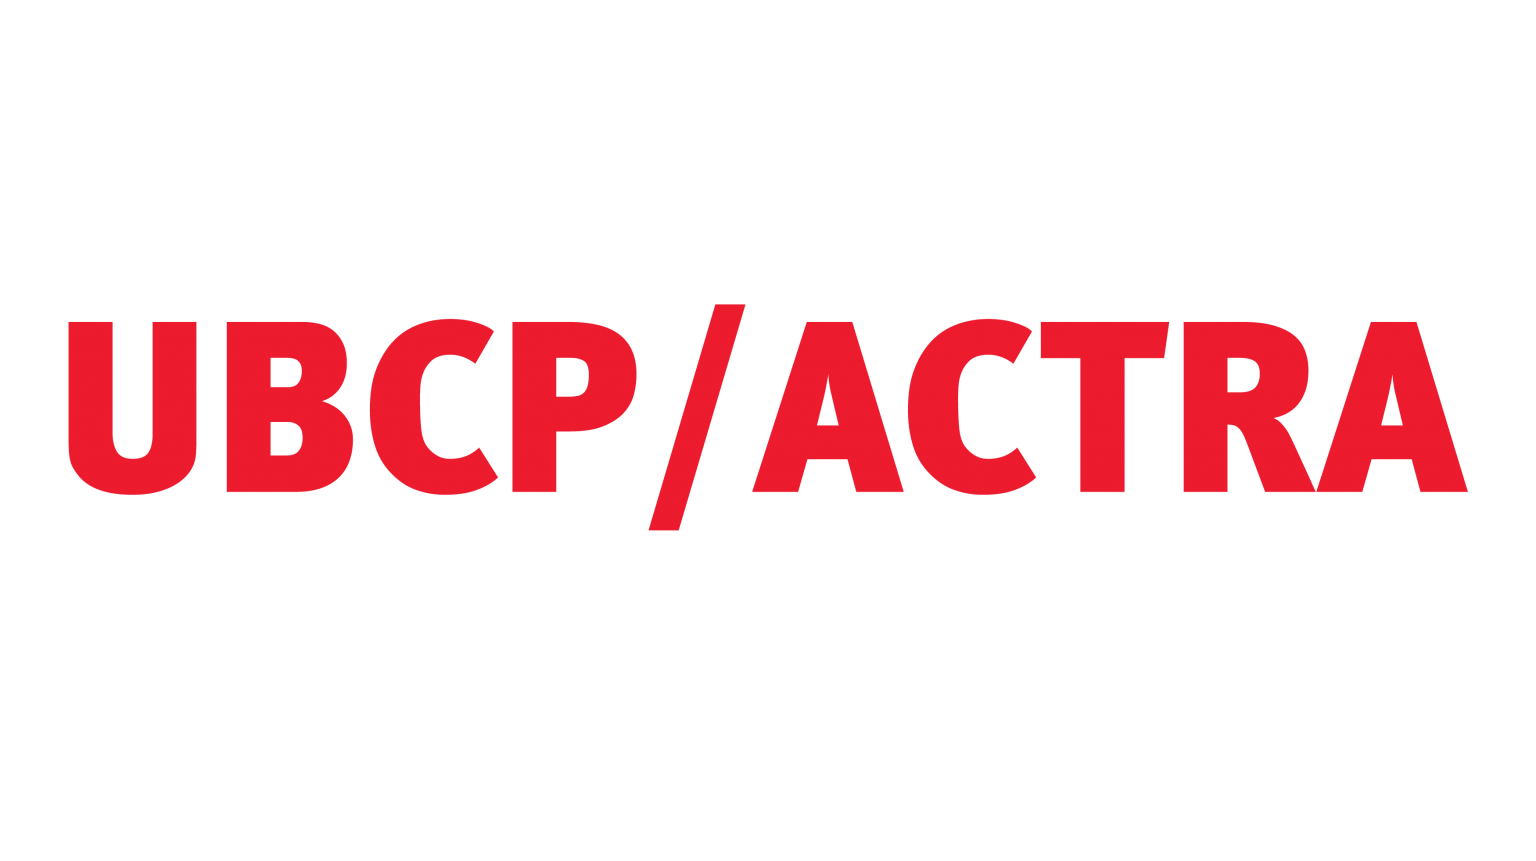 UBCP-ACTRA-2022-1536x861.png